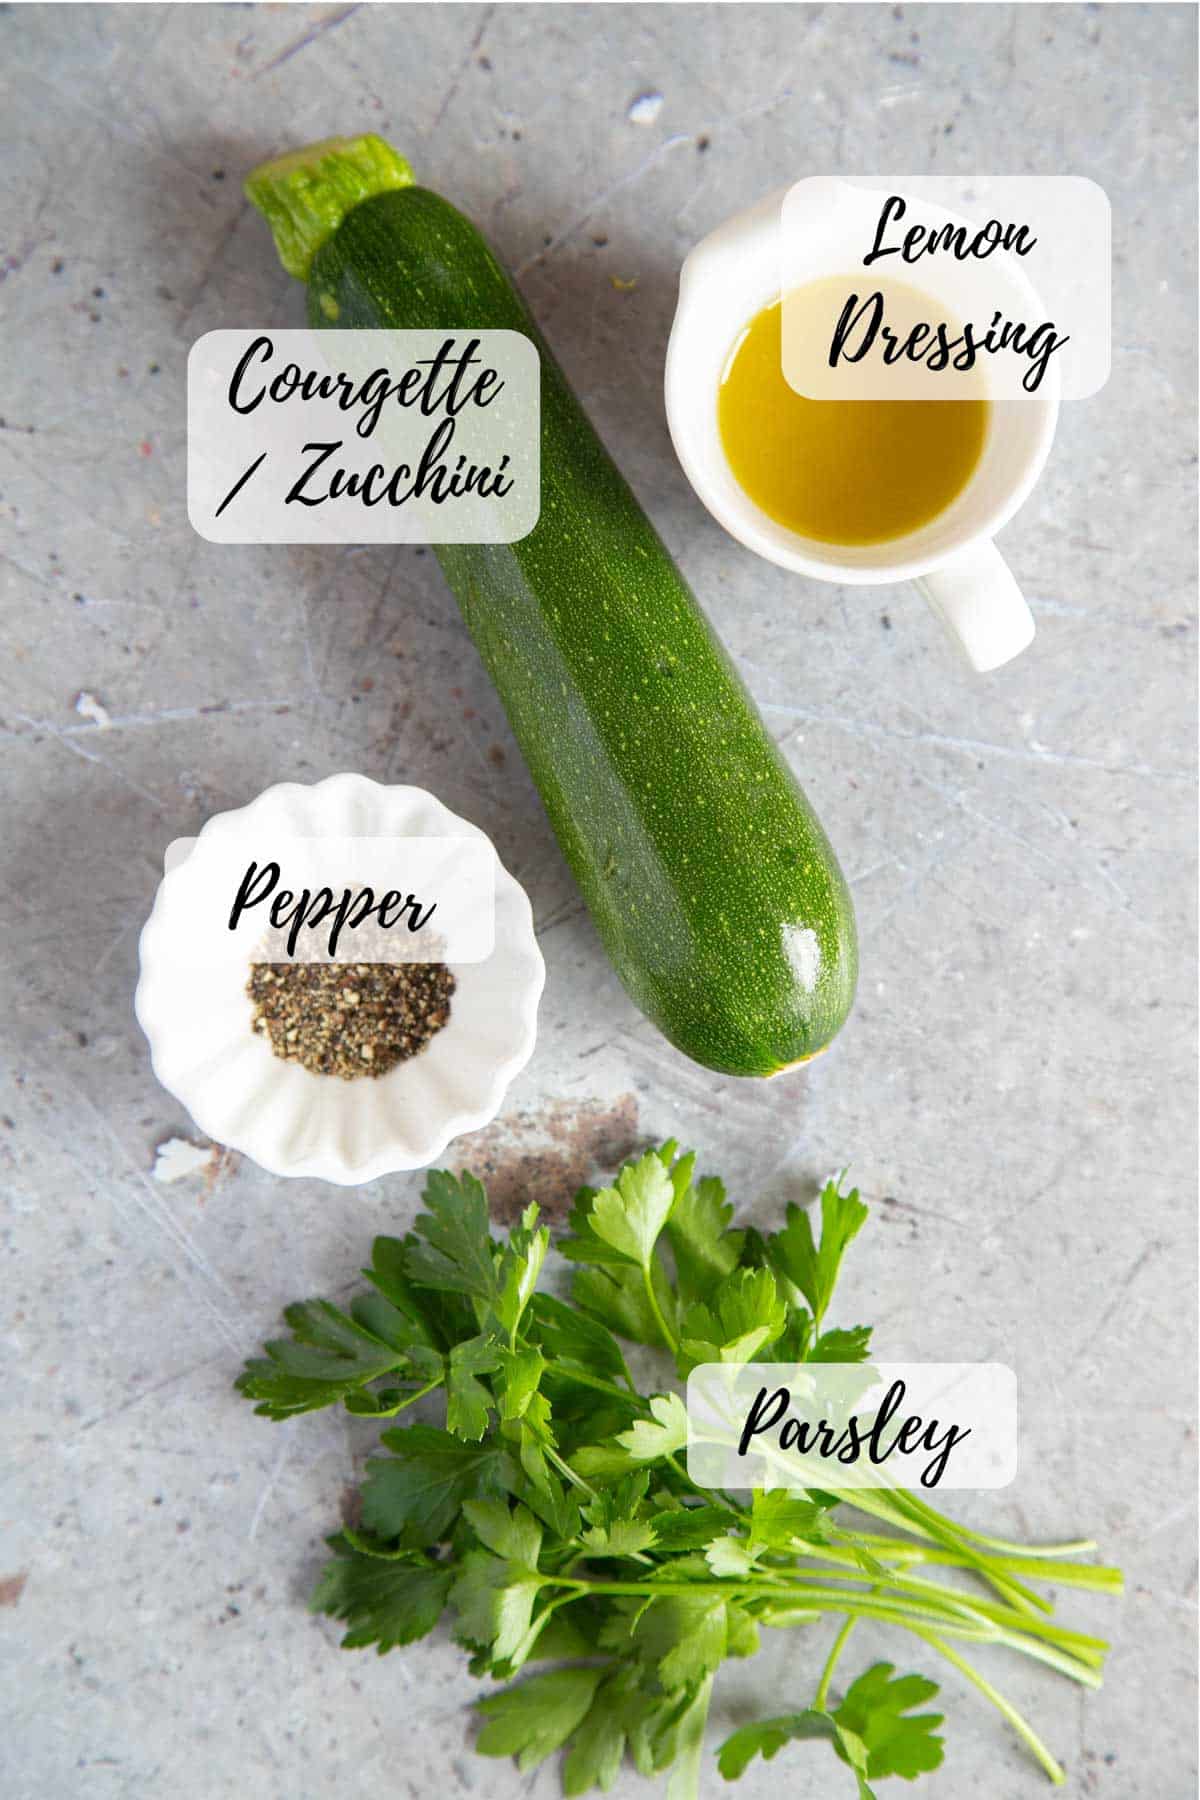 Ingredients for courgette salad: courgettes, lemon dressing, fresh parsley and black pepper.